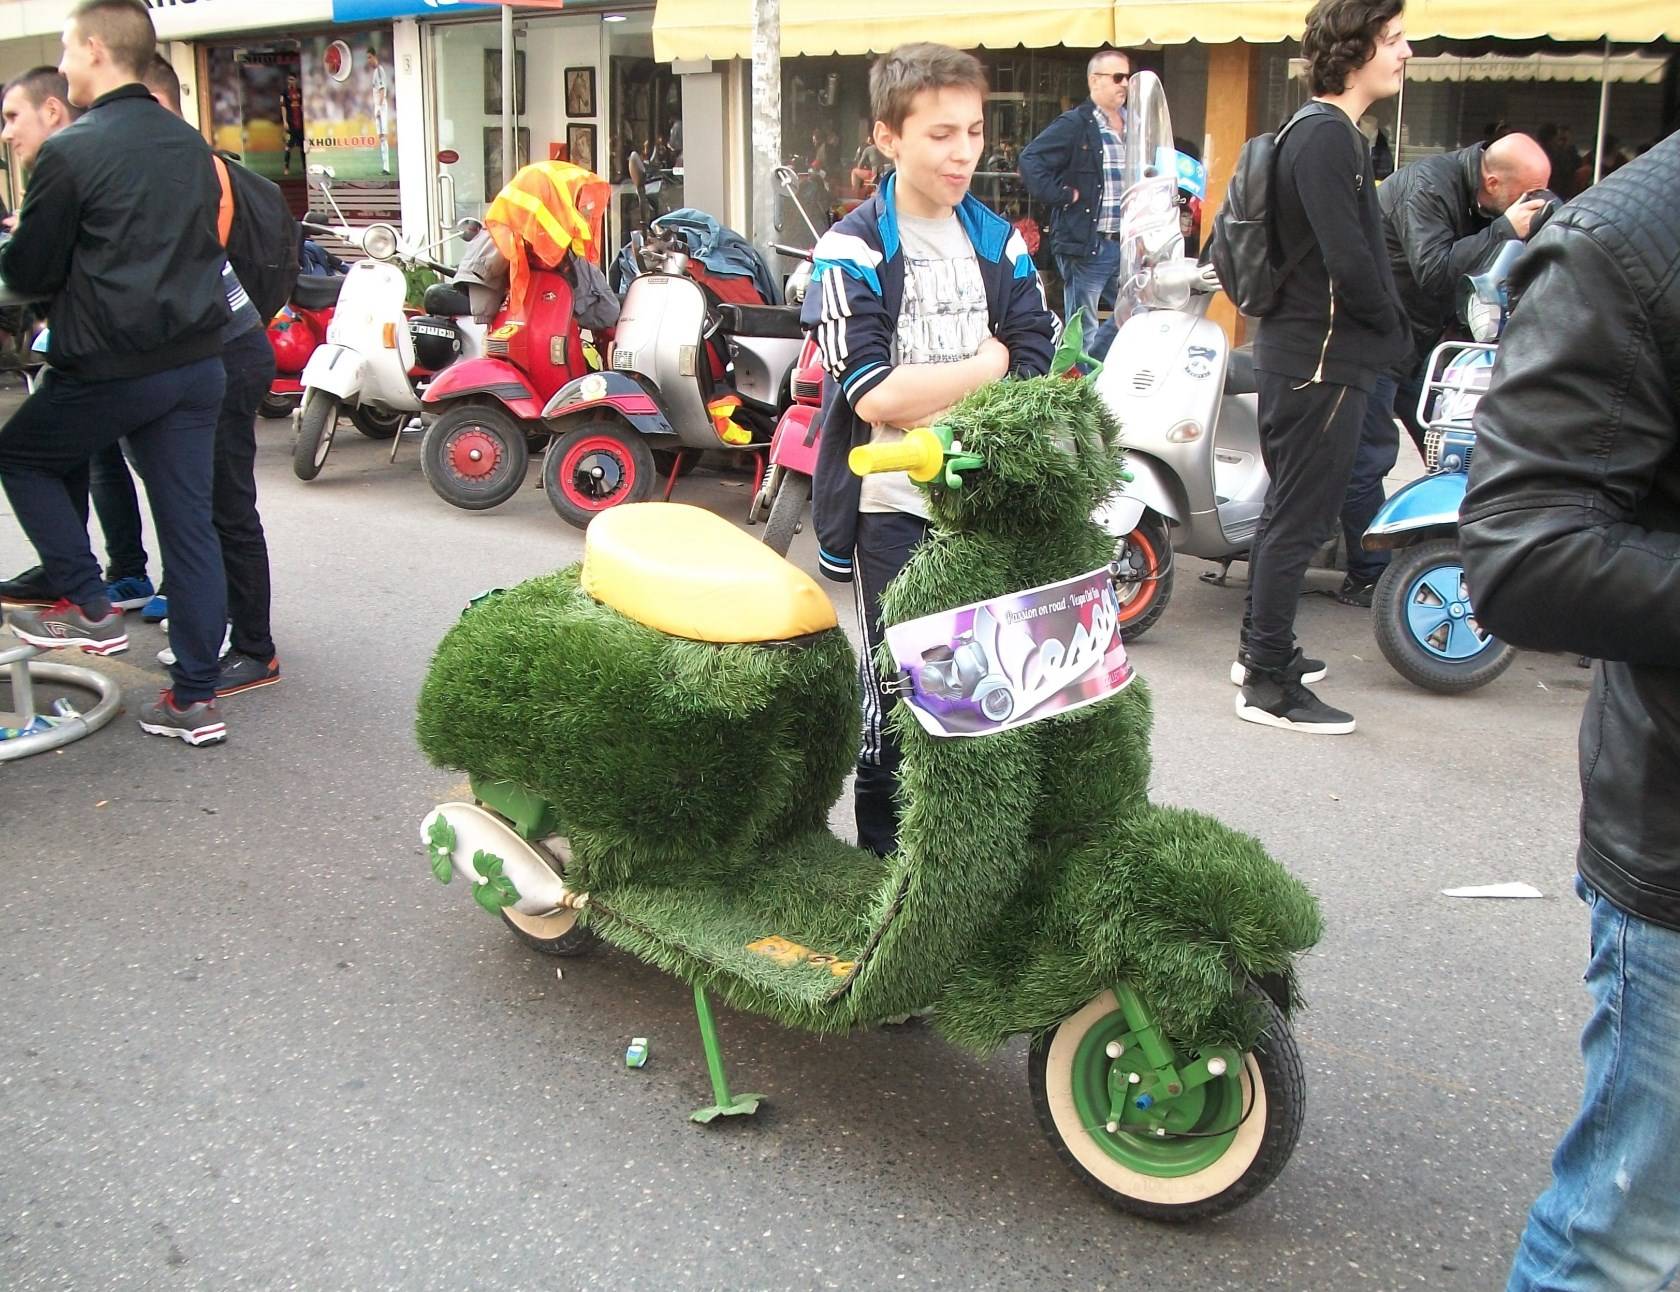 Albanian youth feeling uneasy with "Astroturf Vespa"